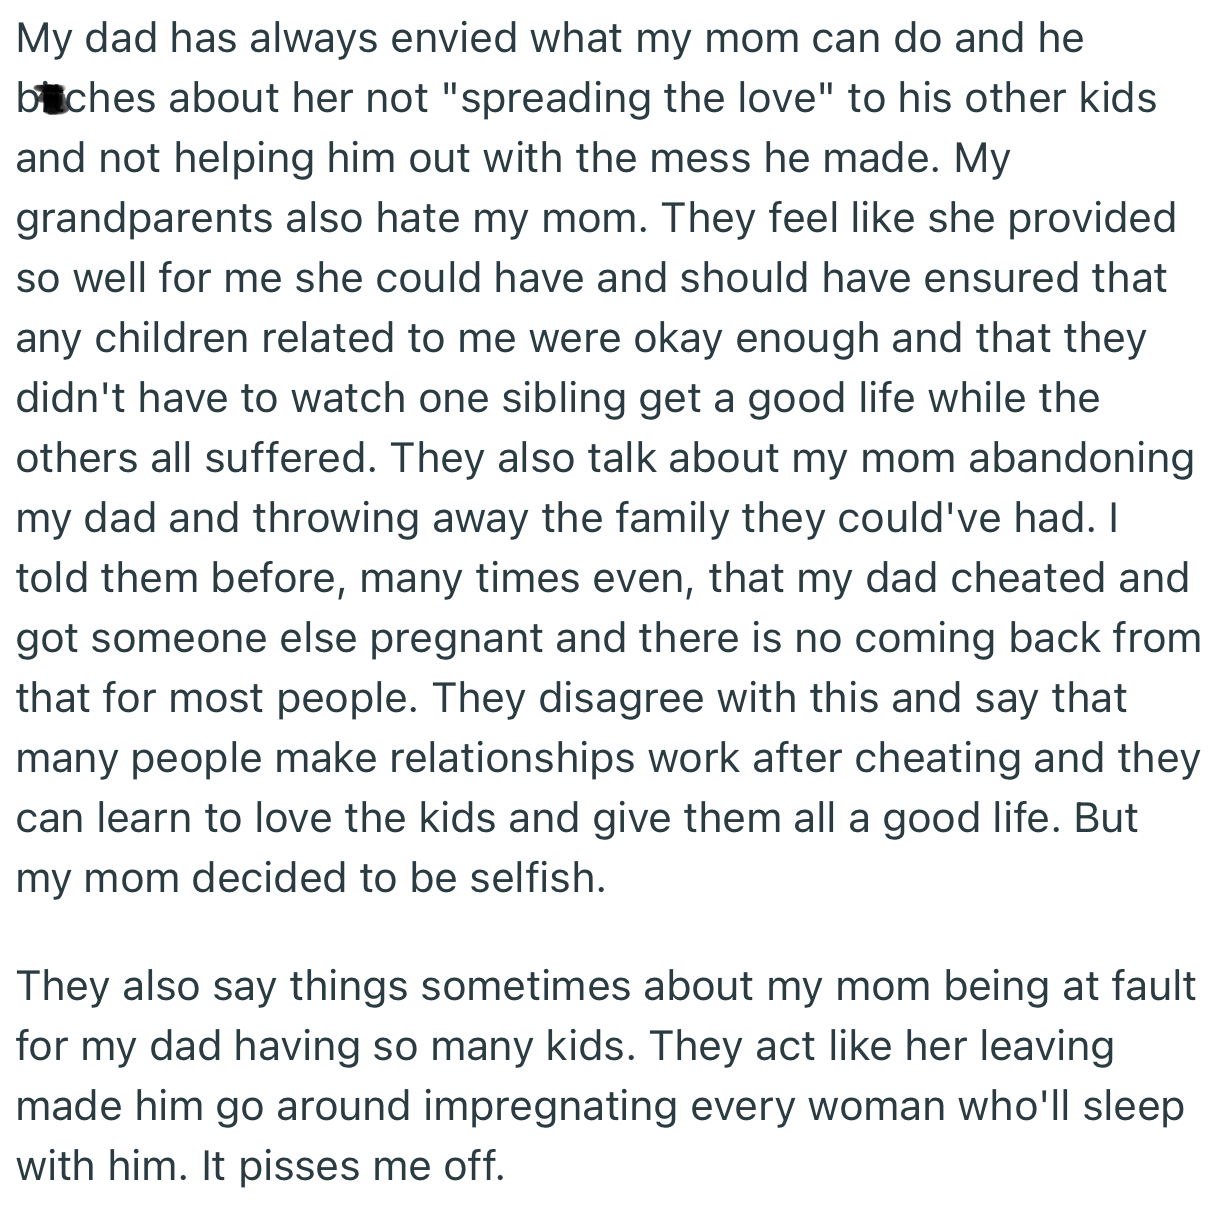 For some odd reason, OP’s dad and grandparents have slammed his mom for not extending her finances to the other half-siblings. In fact, they accused OP’s mom of being at fault for the collapsed marriage, despite his dad being a serial cheater